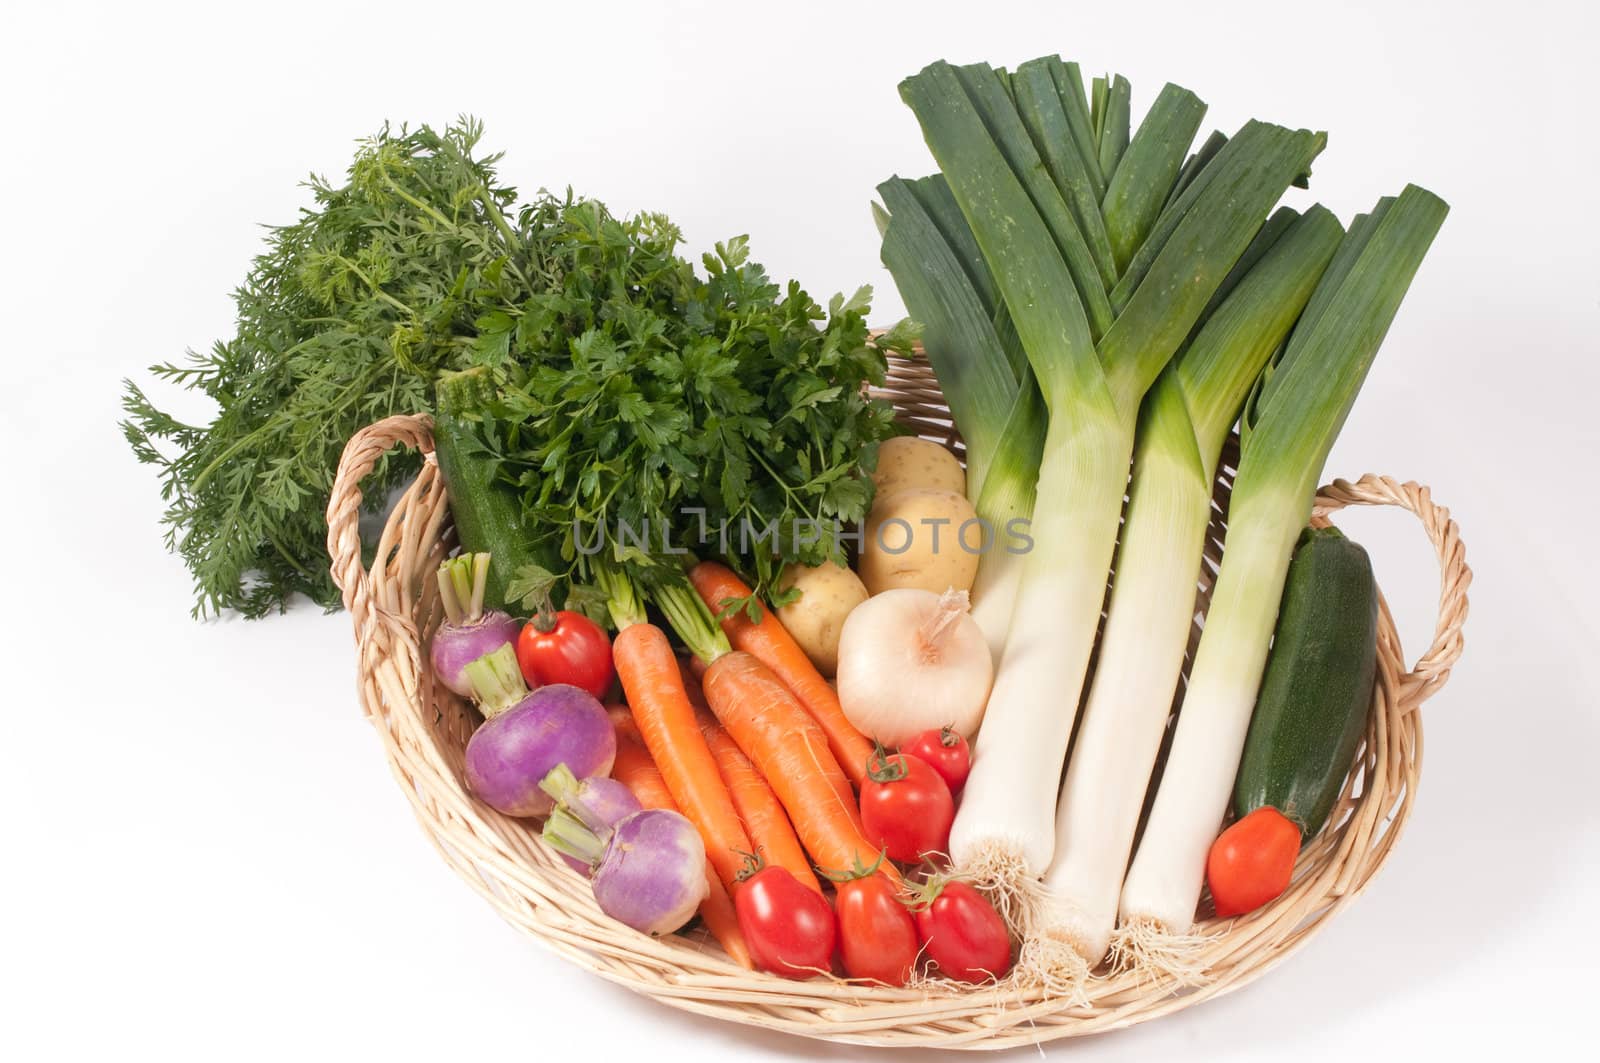 Vegetables for cooking soup by bigmagic